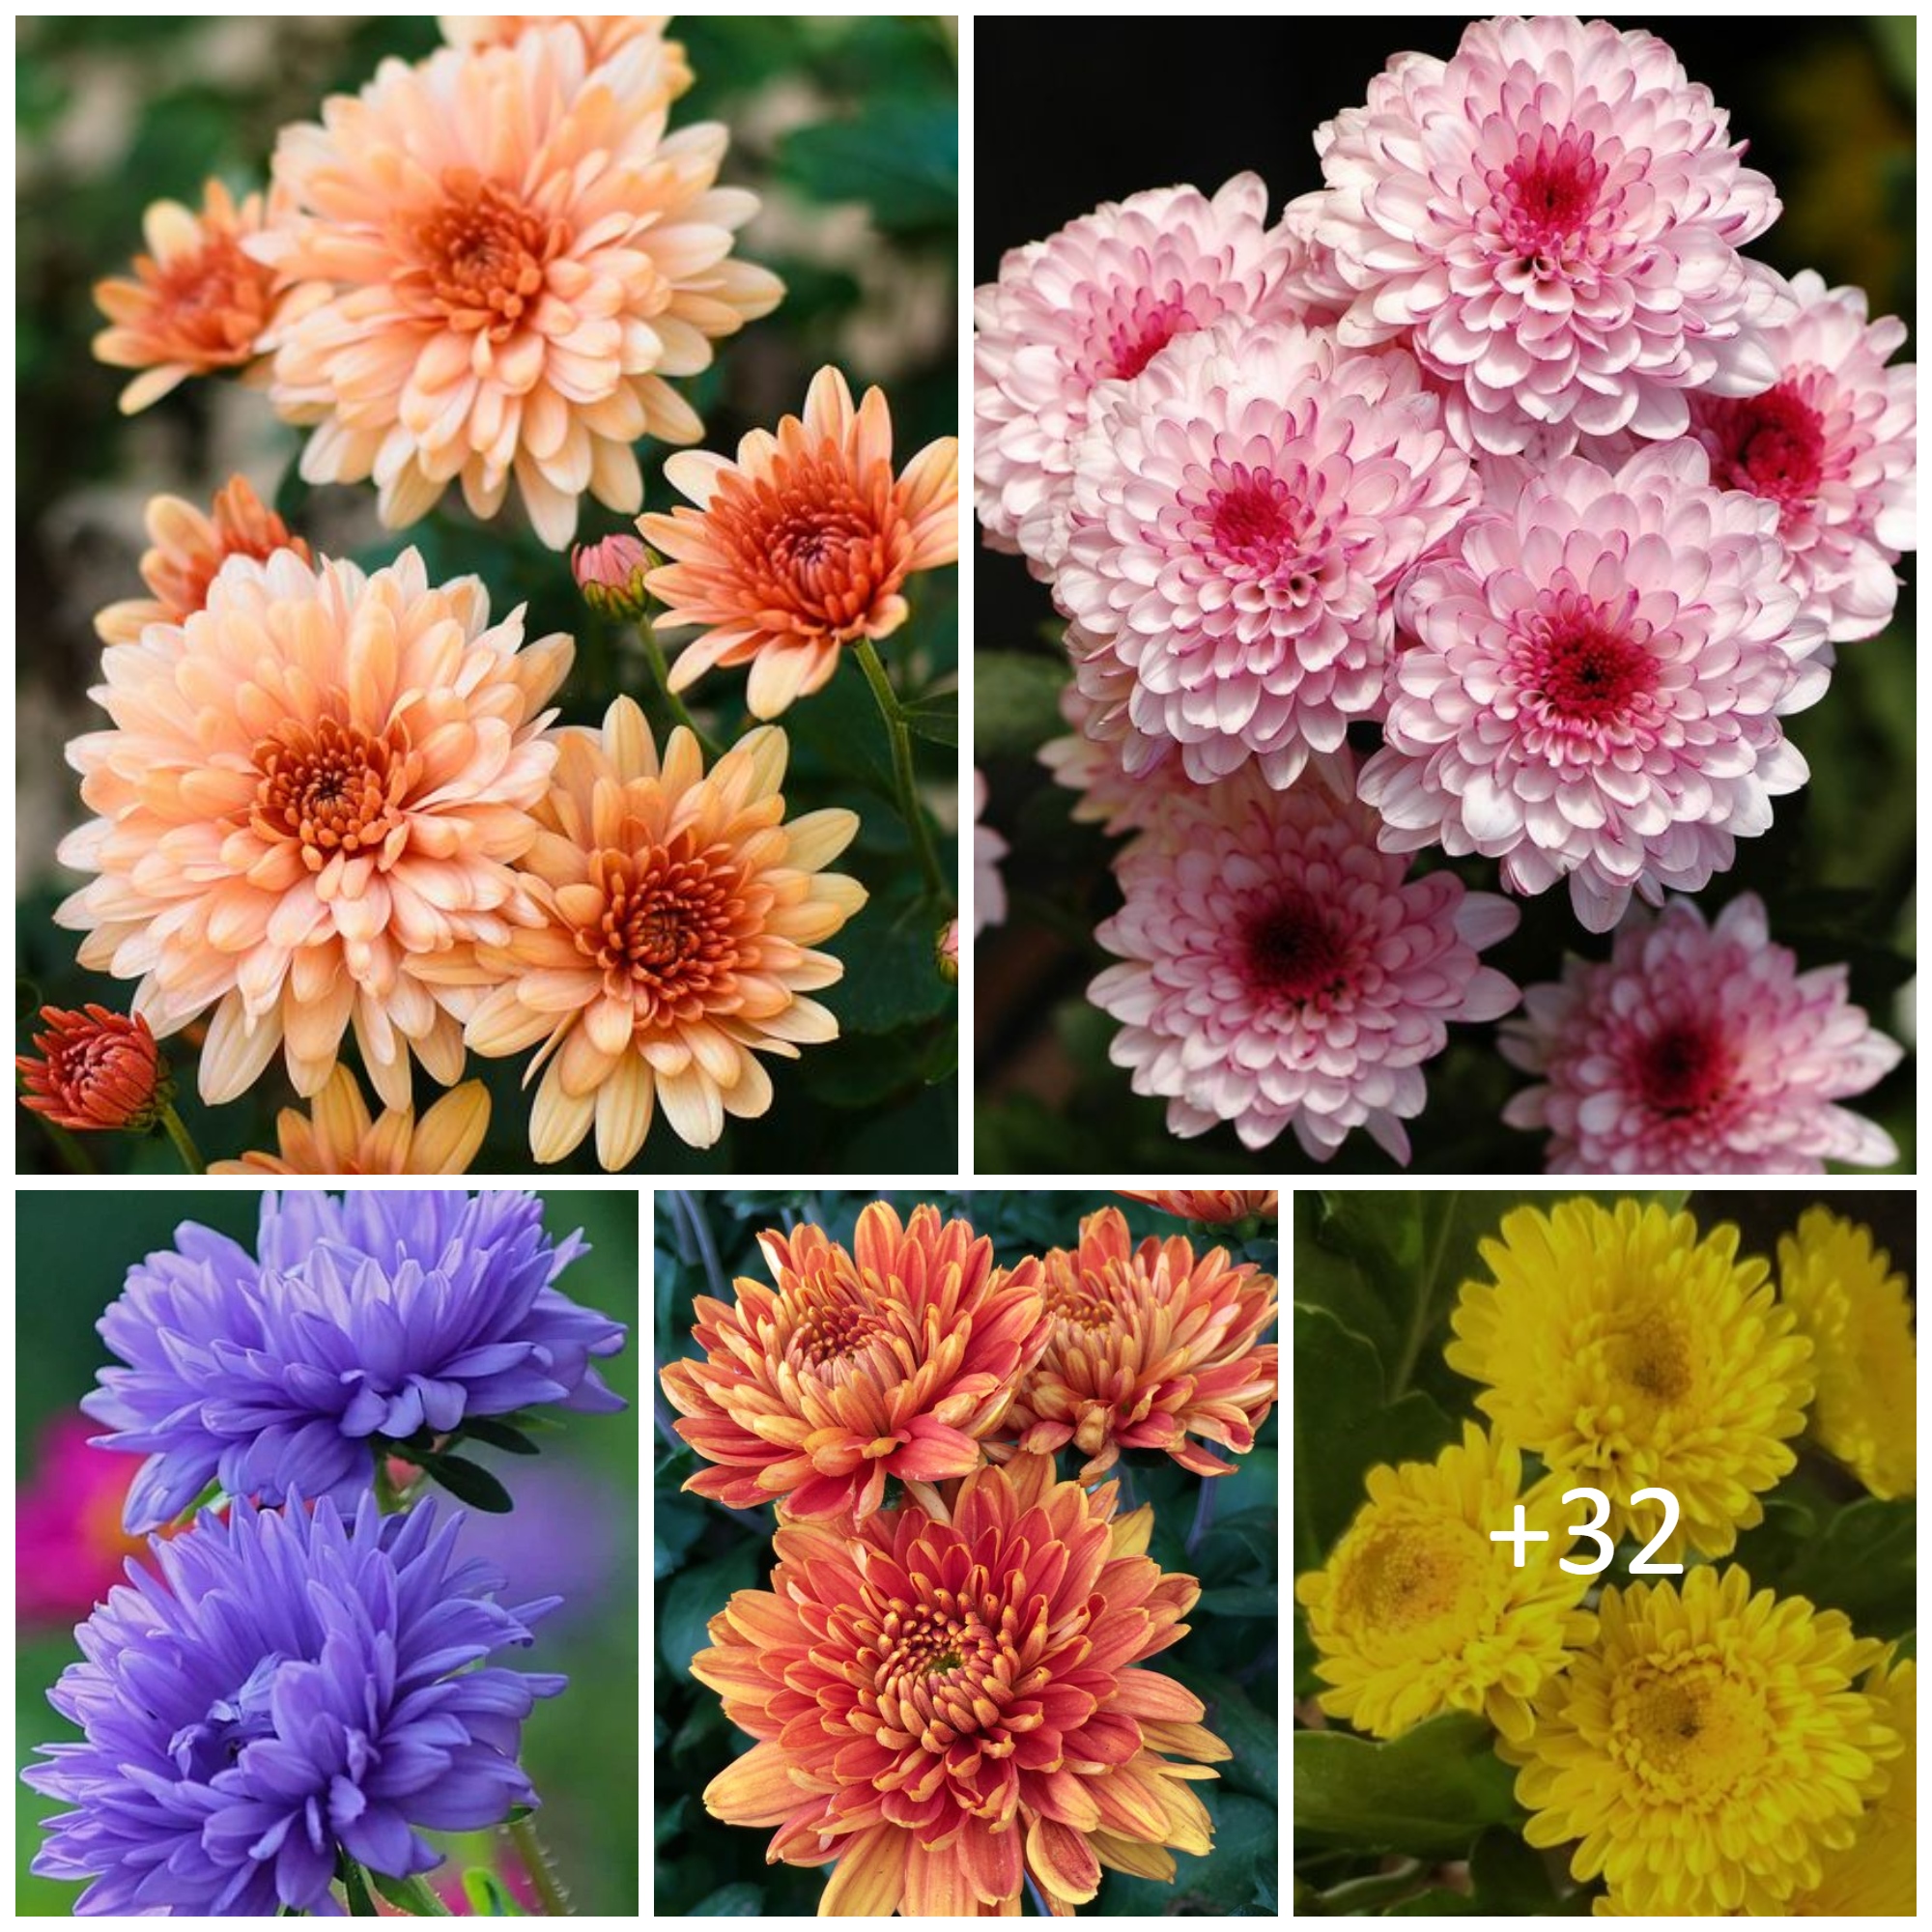 Guide to Selecting, Caring for Chrysanthemums